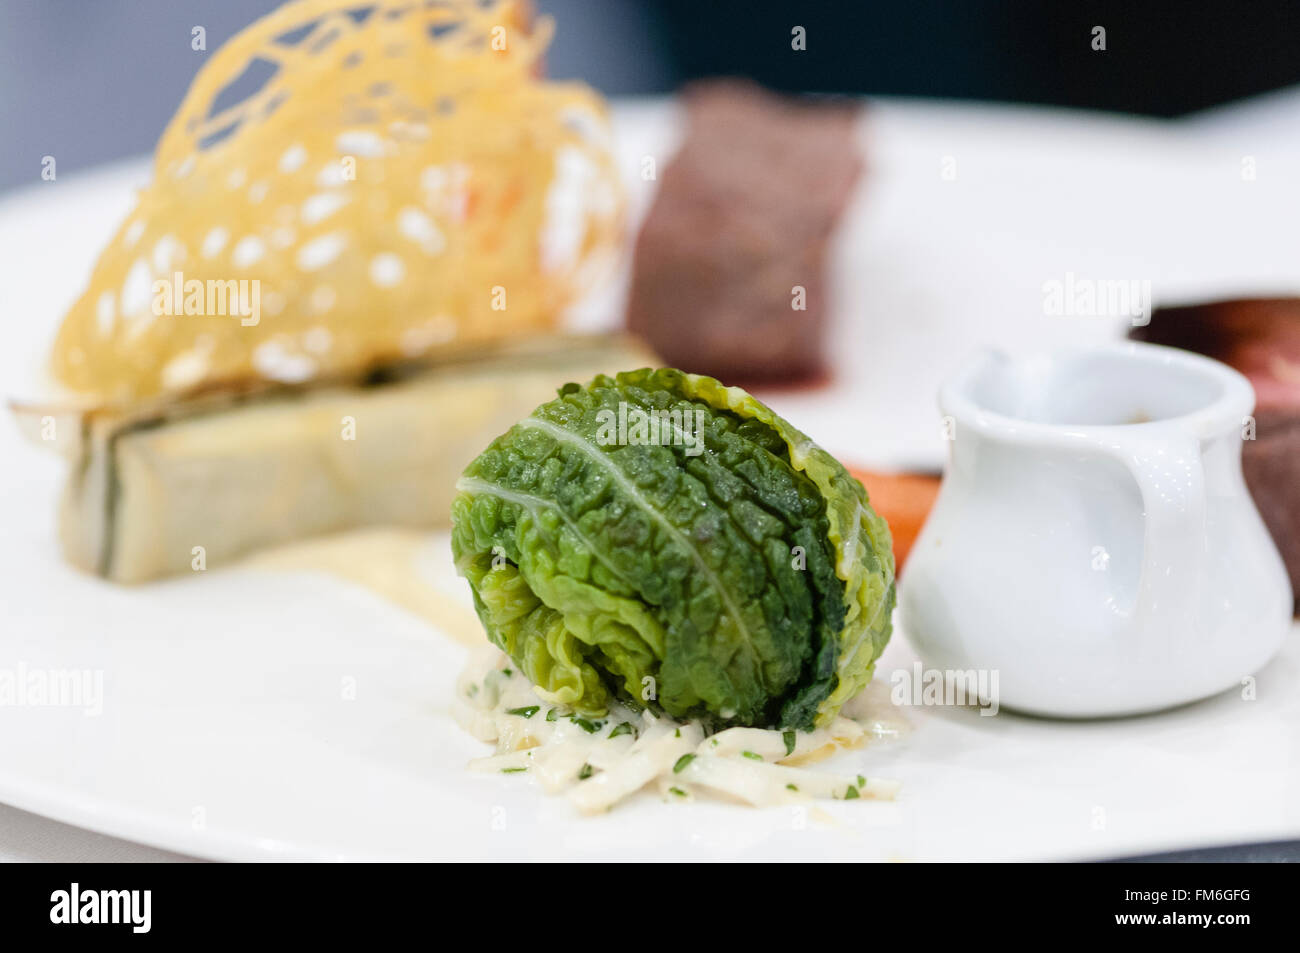 A Brussels sprout perfectly cooked and presented on a plate in a restaurant. Stock Photo